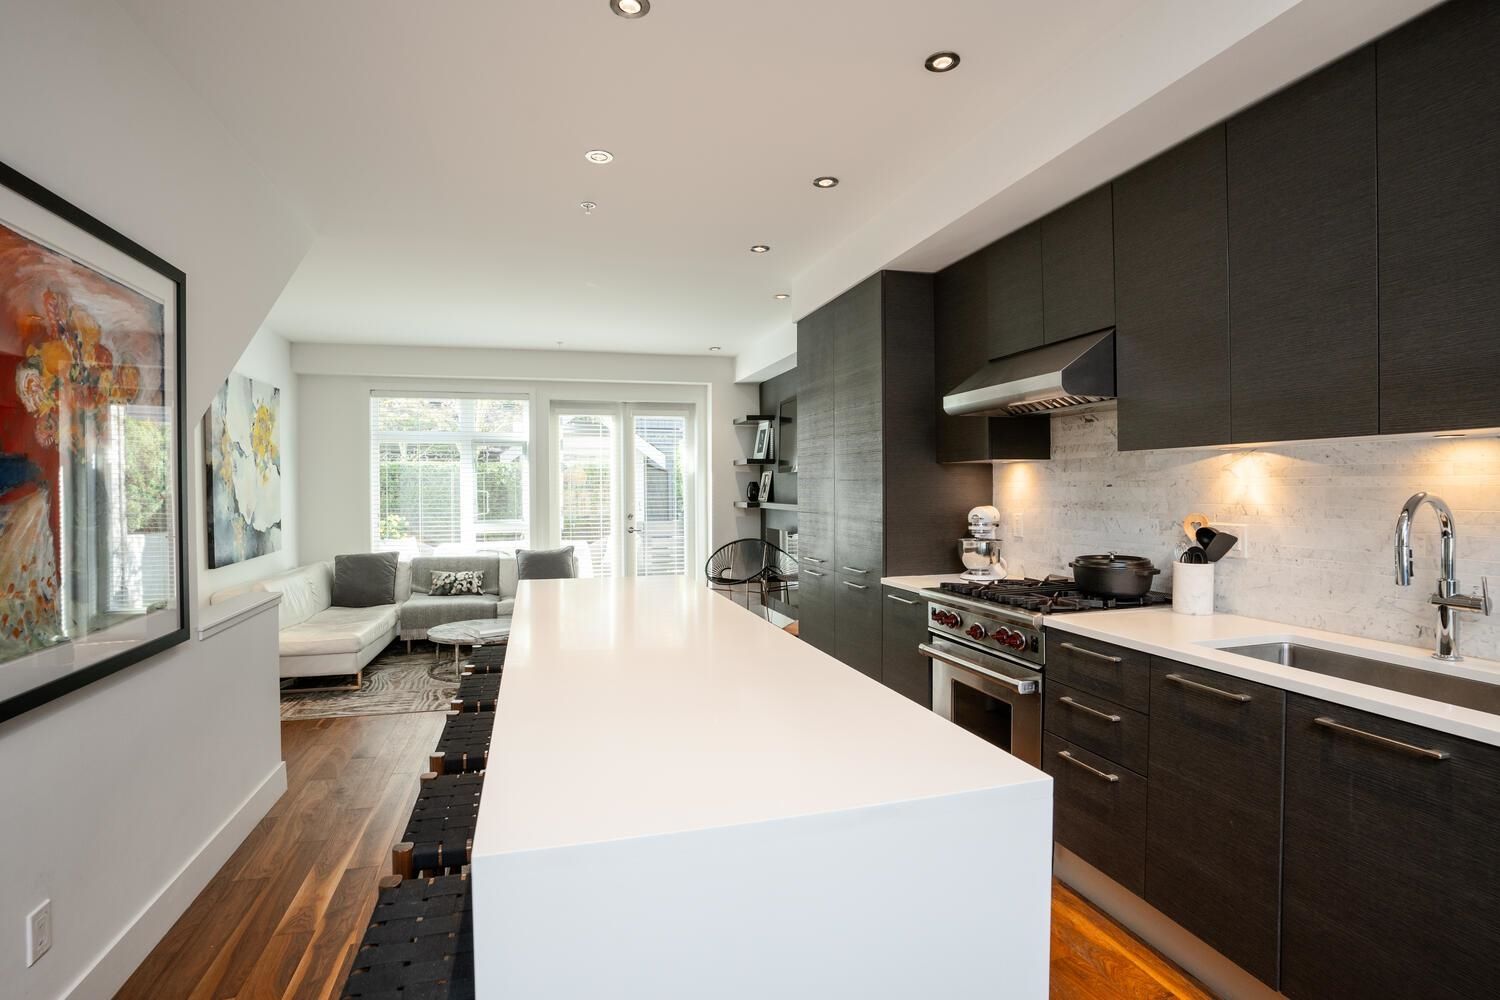 New property listed in MacKenzie Heights, Vancouver West